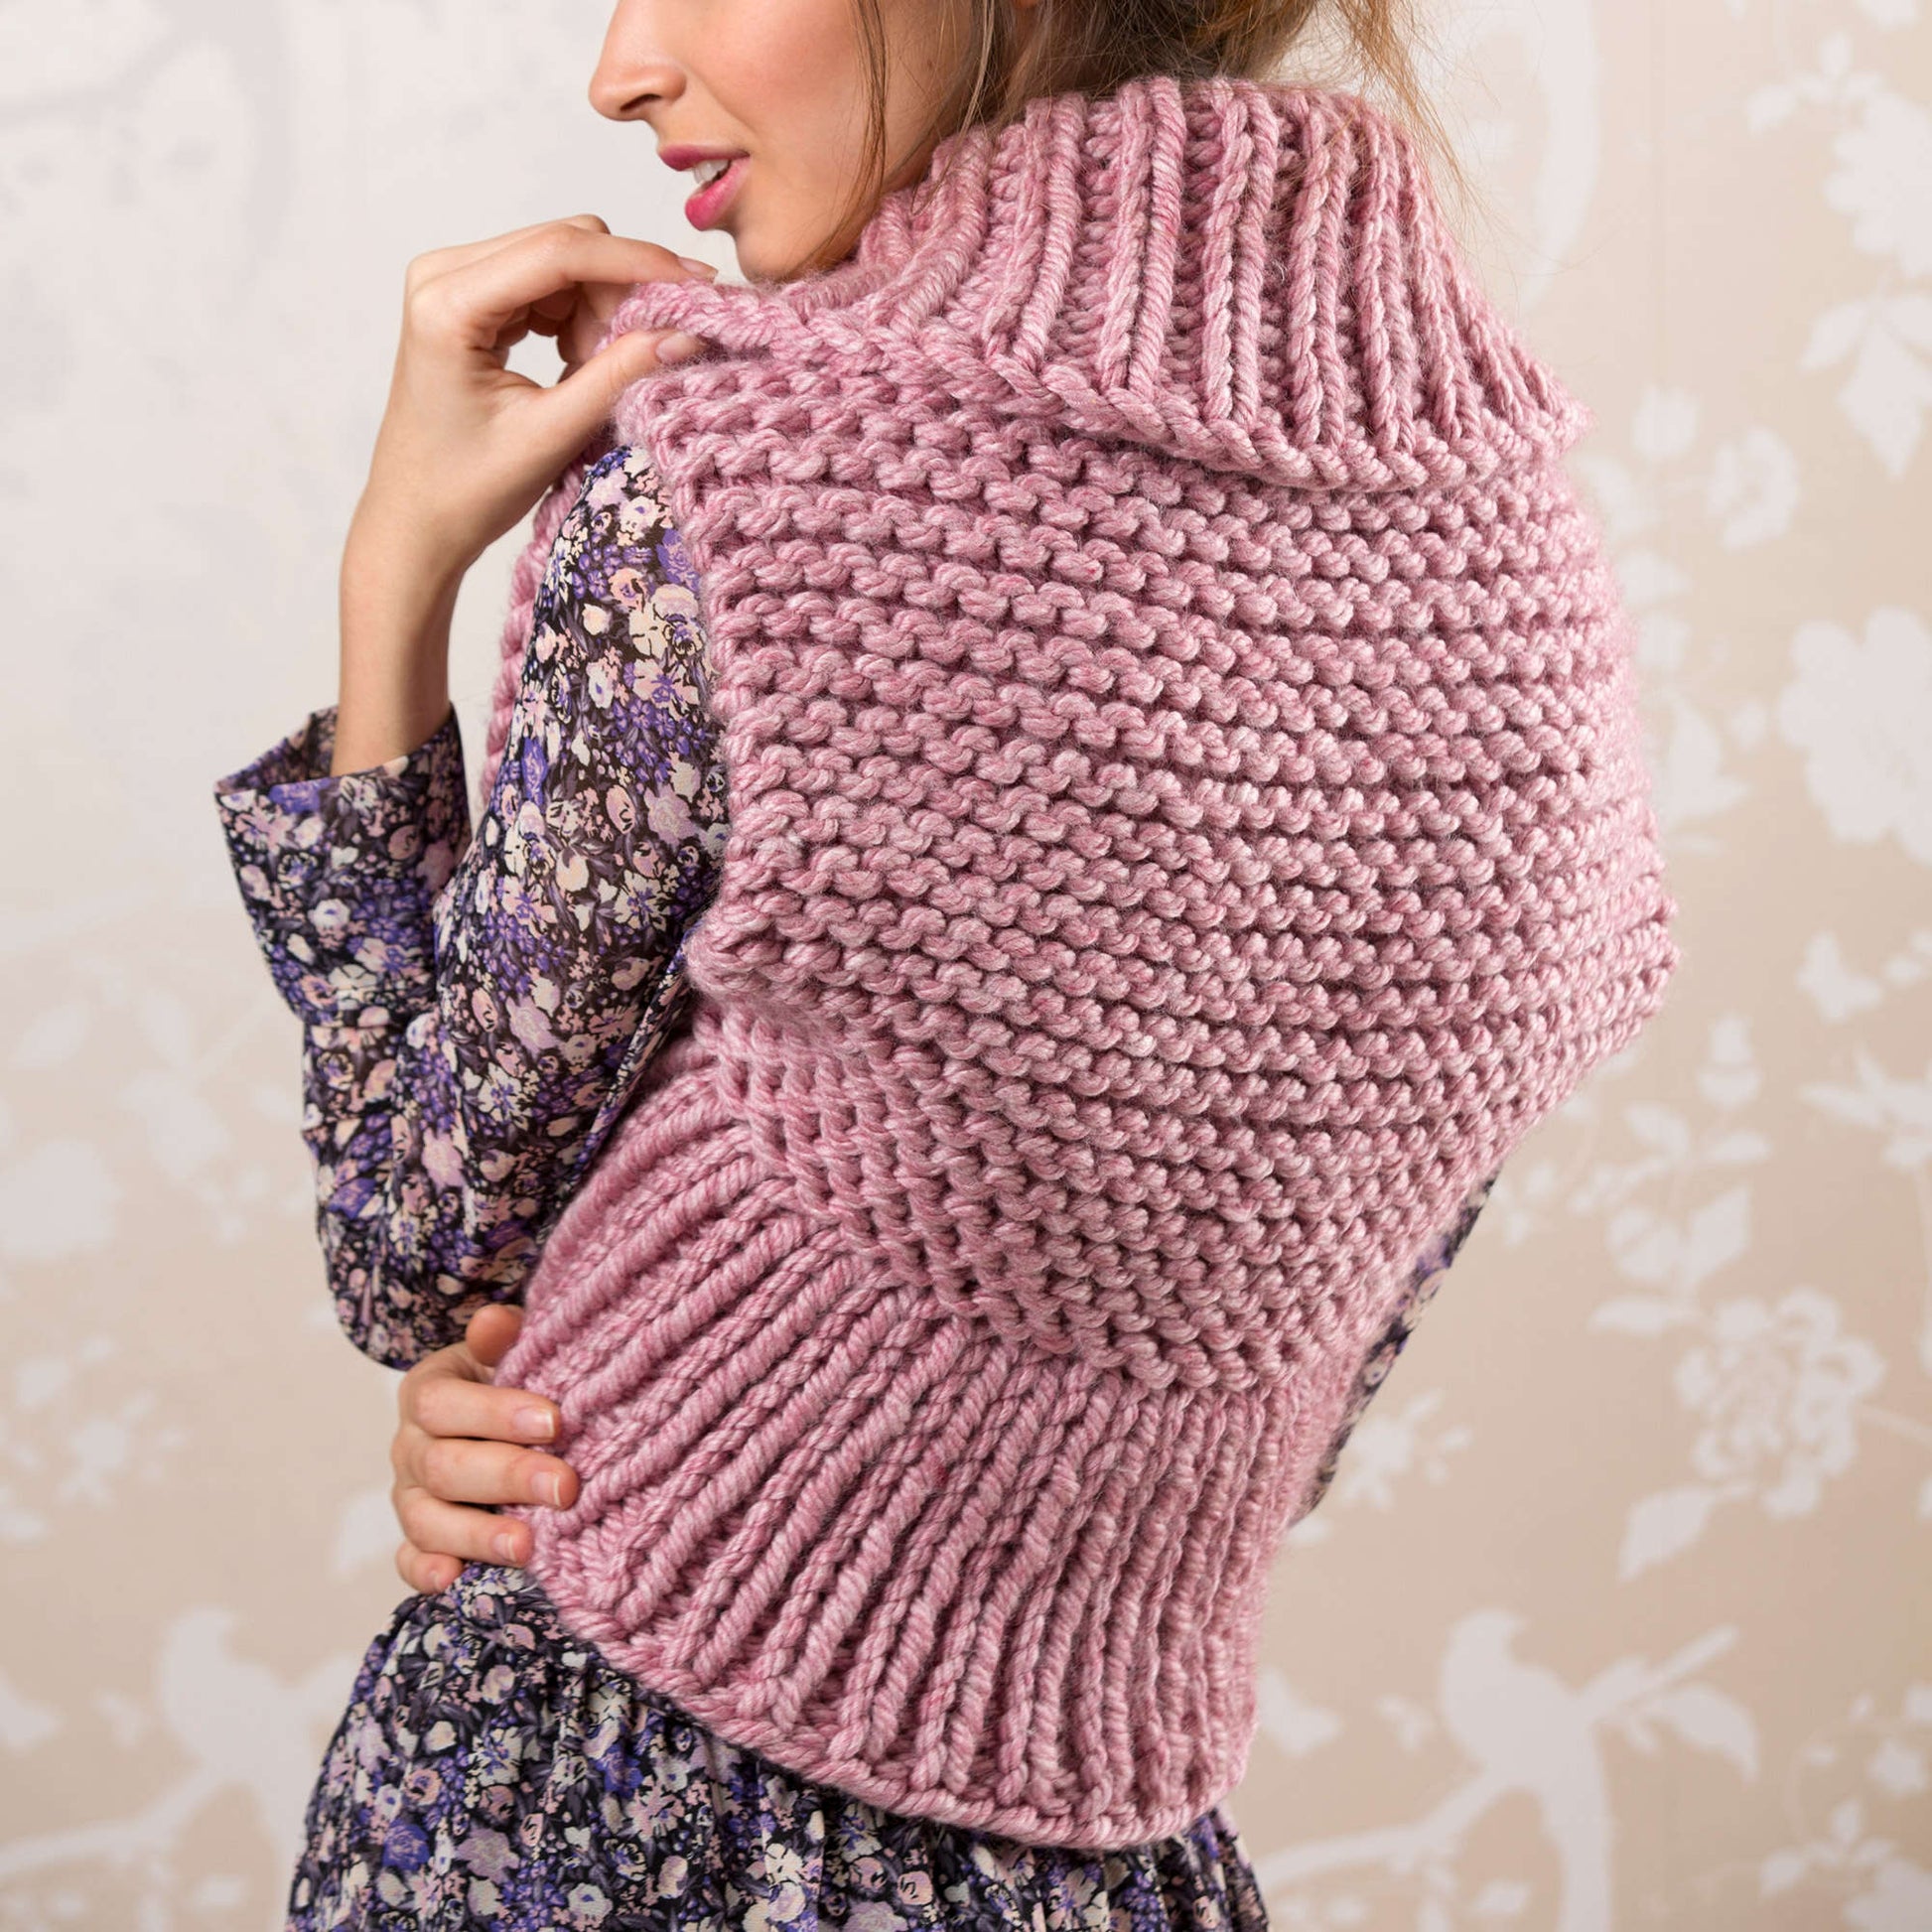 Free Red Heart Knit Cozy Shrug Pattern